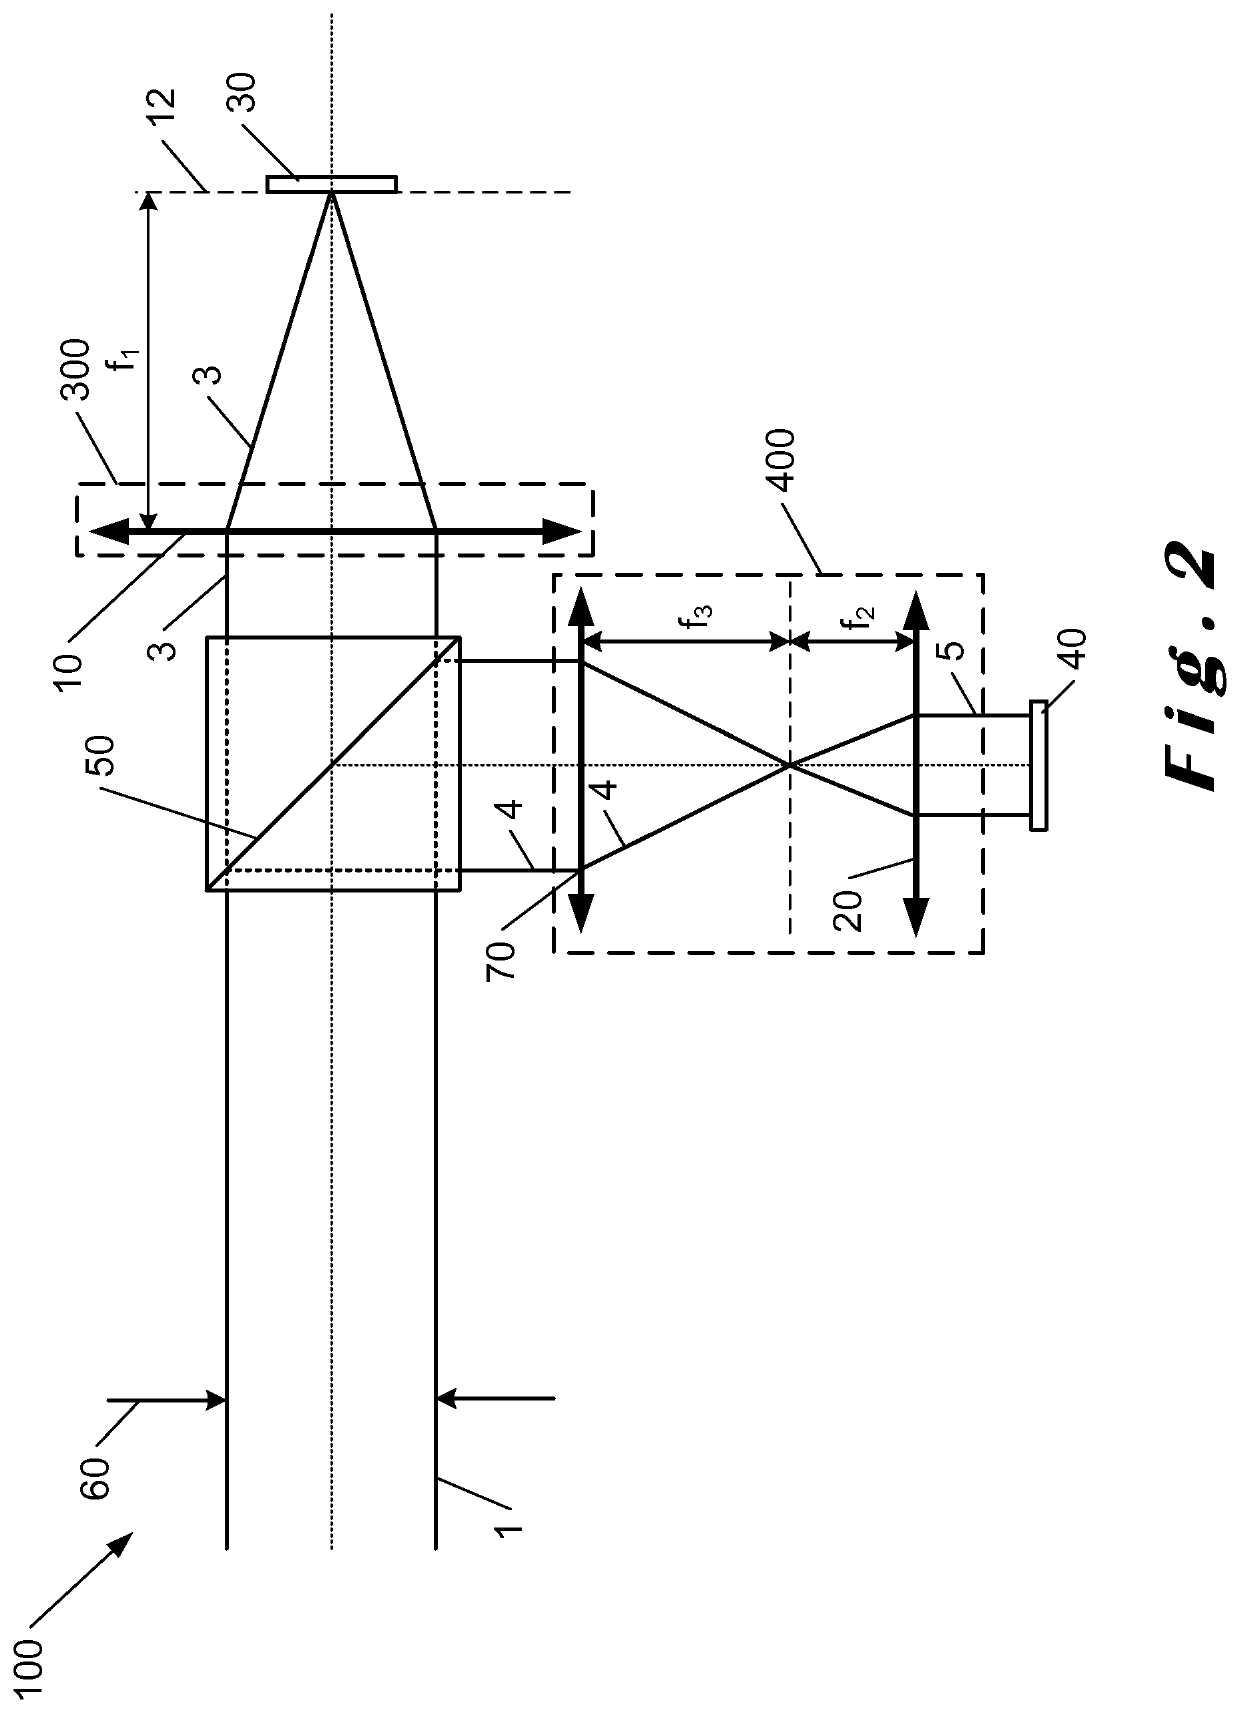 Optical device and method for detecting the drift of a light beam